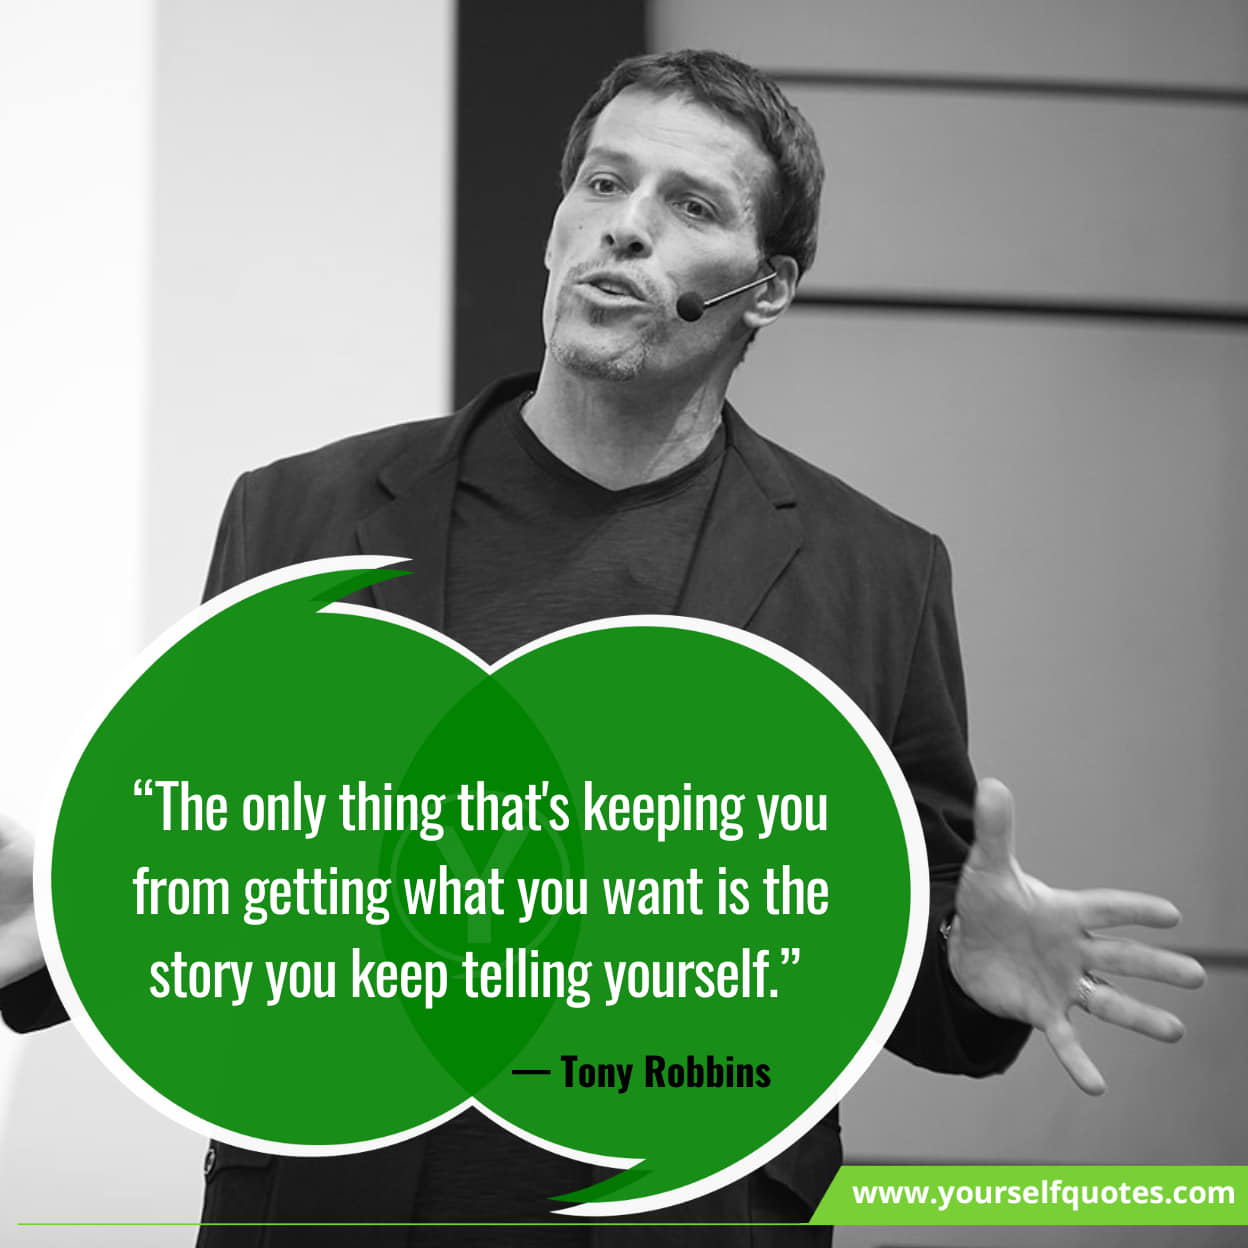 Tony Robbins Quotes For Understanding